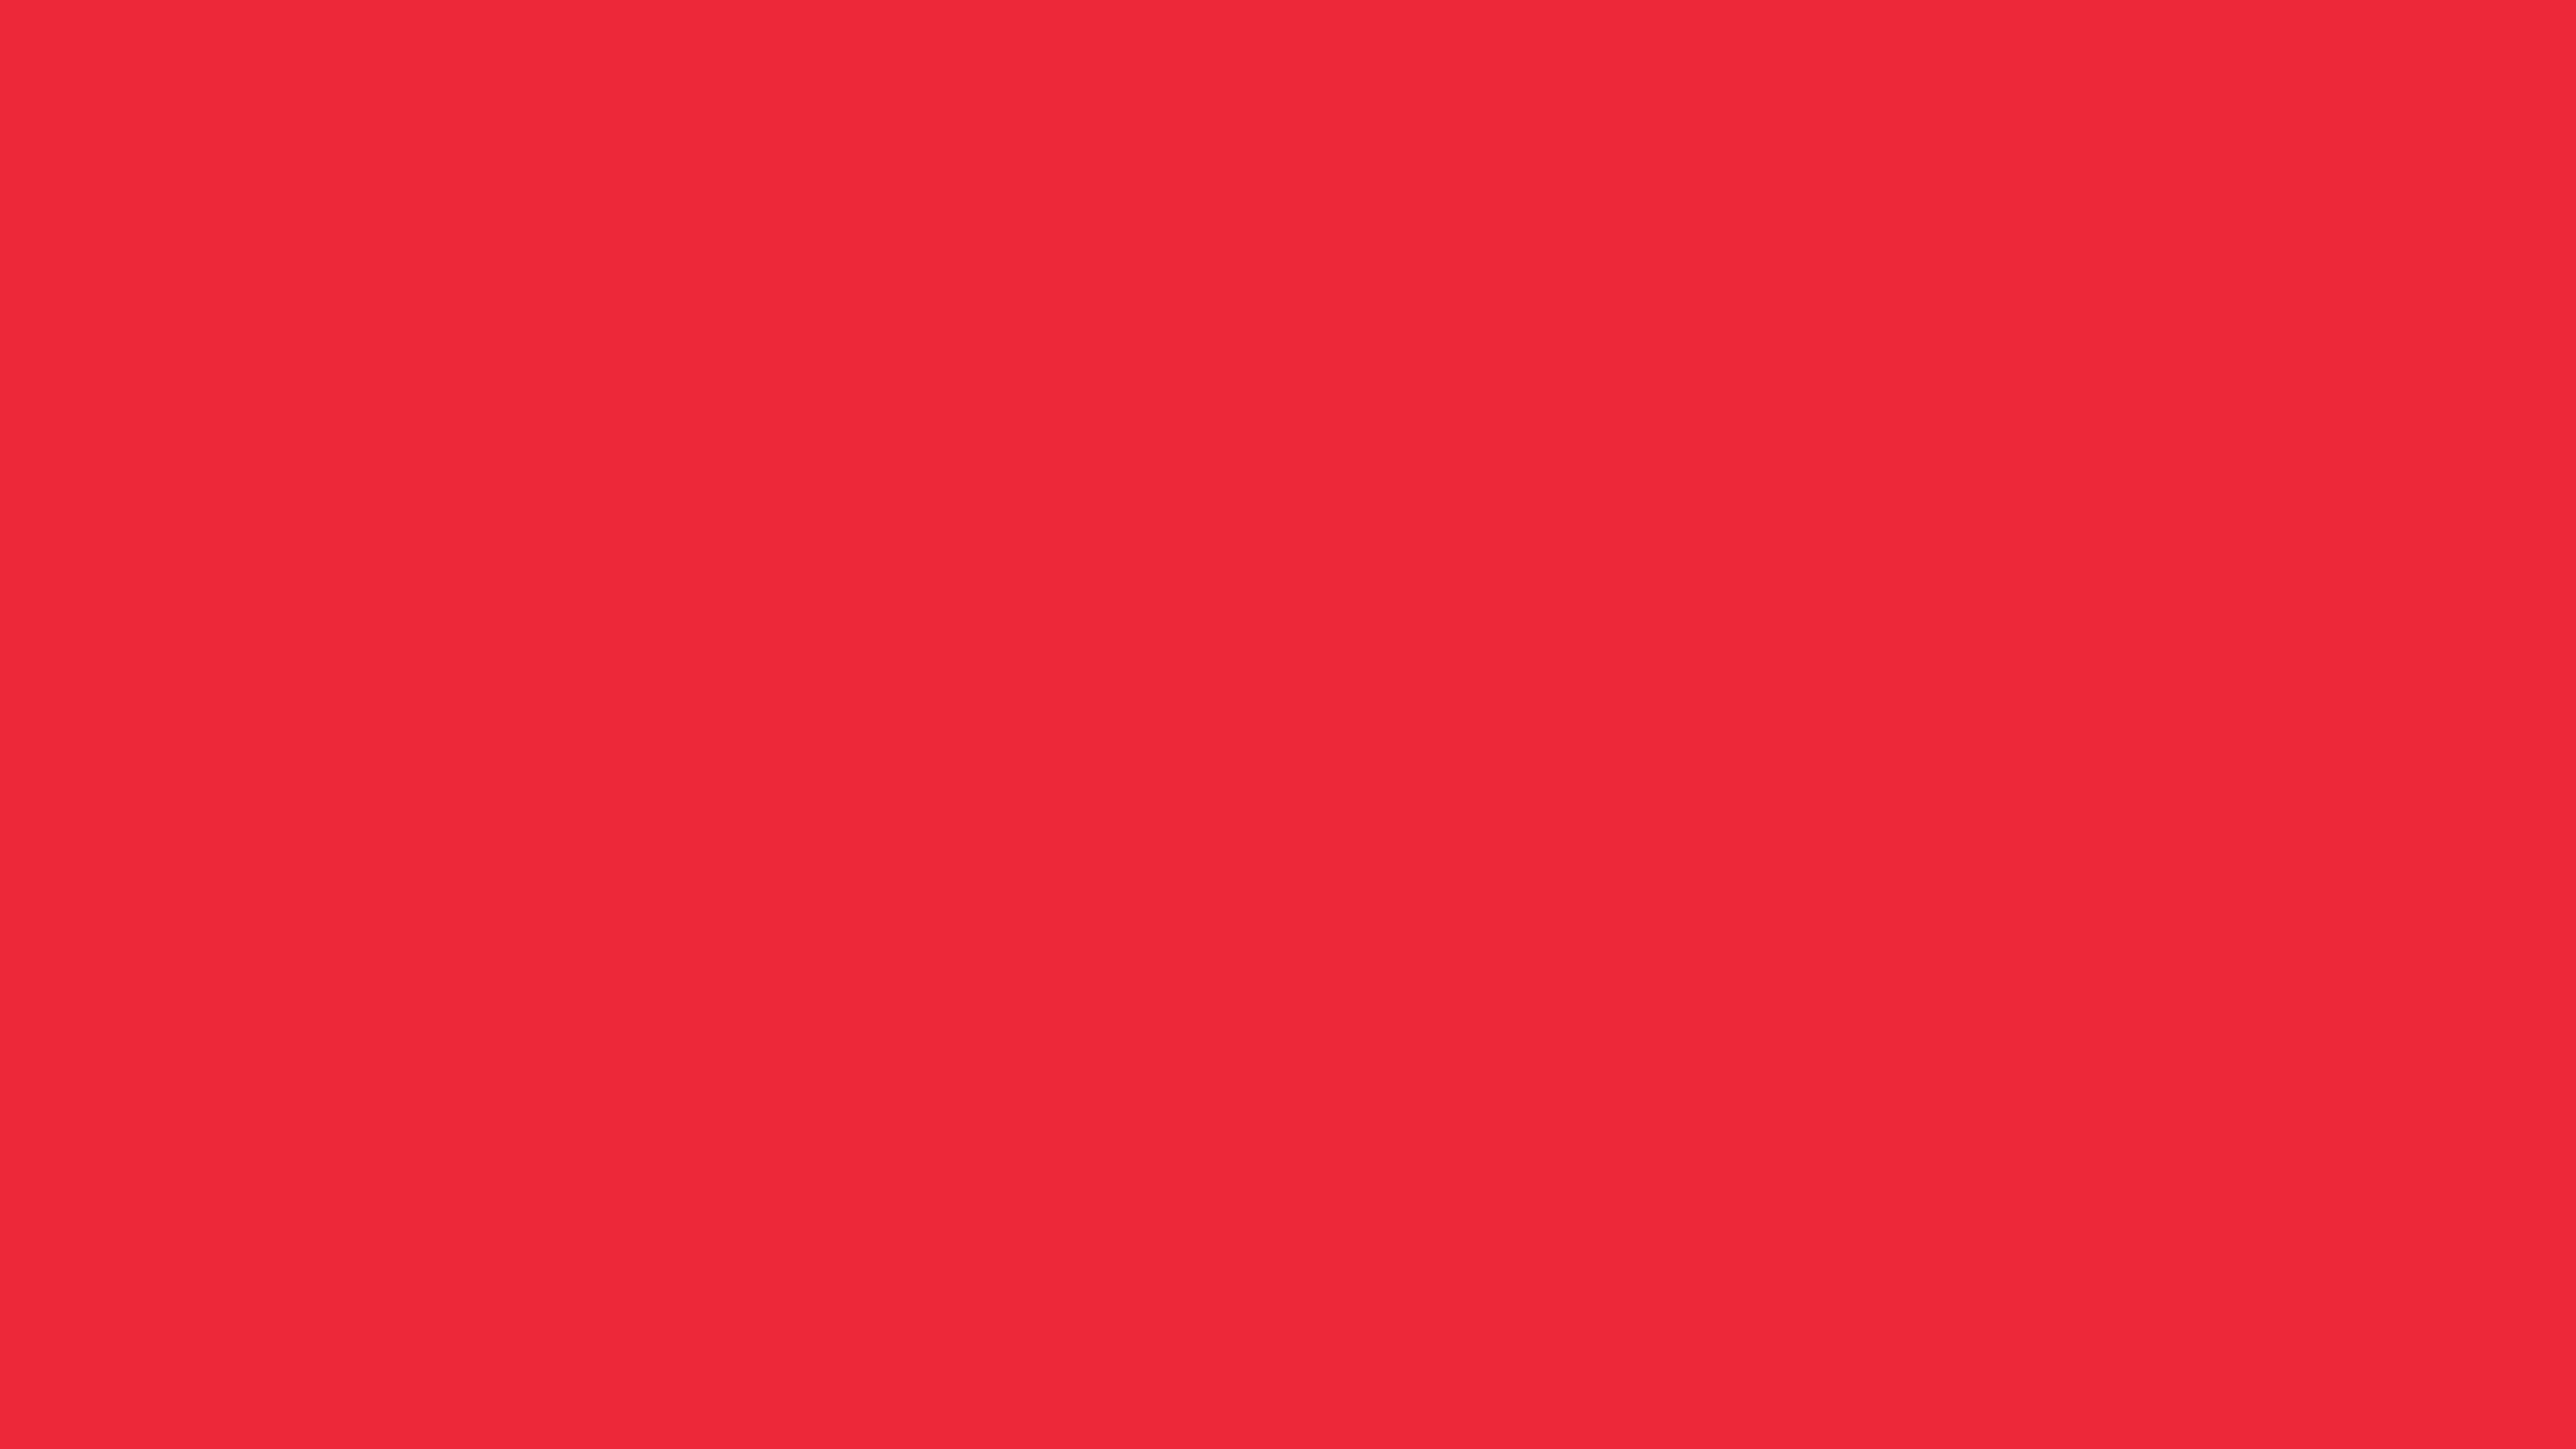 5120x2880 Red Pantone Solid Color Background